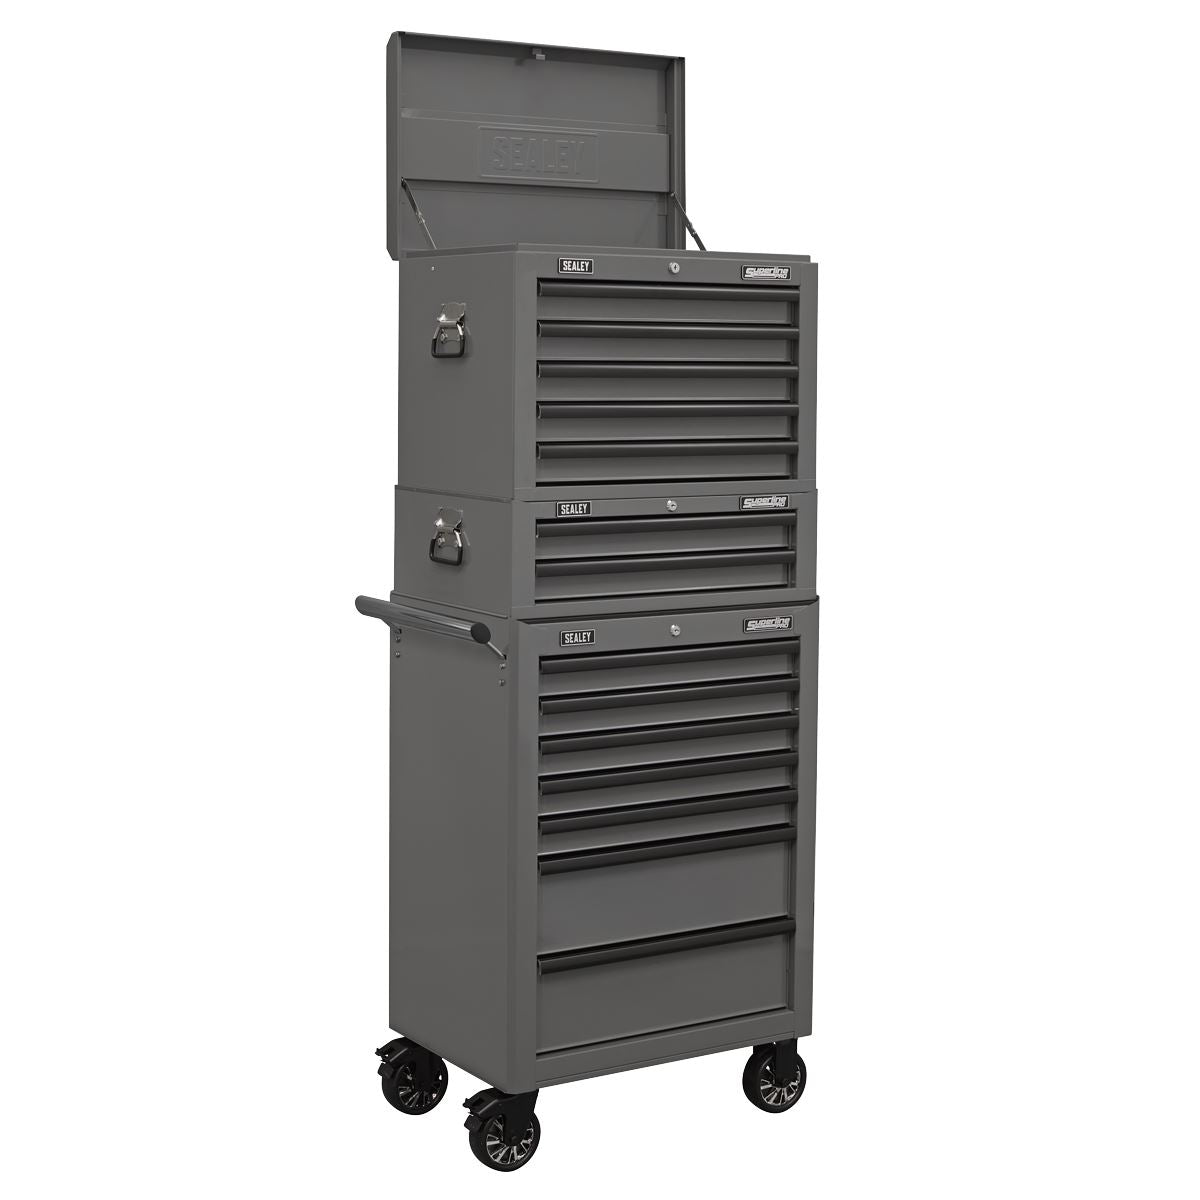 Sealey Superline Pro Topchest 5 Drawer with Ball-Bearing Slides - Grey/Black